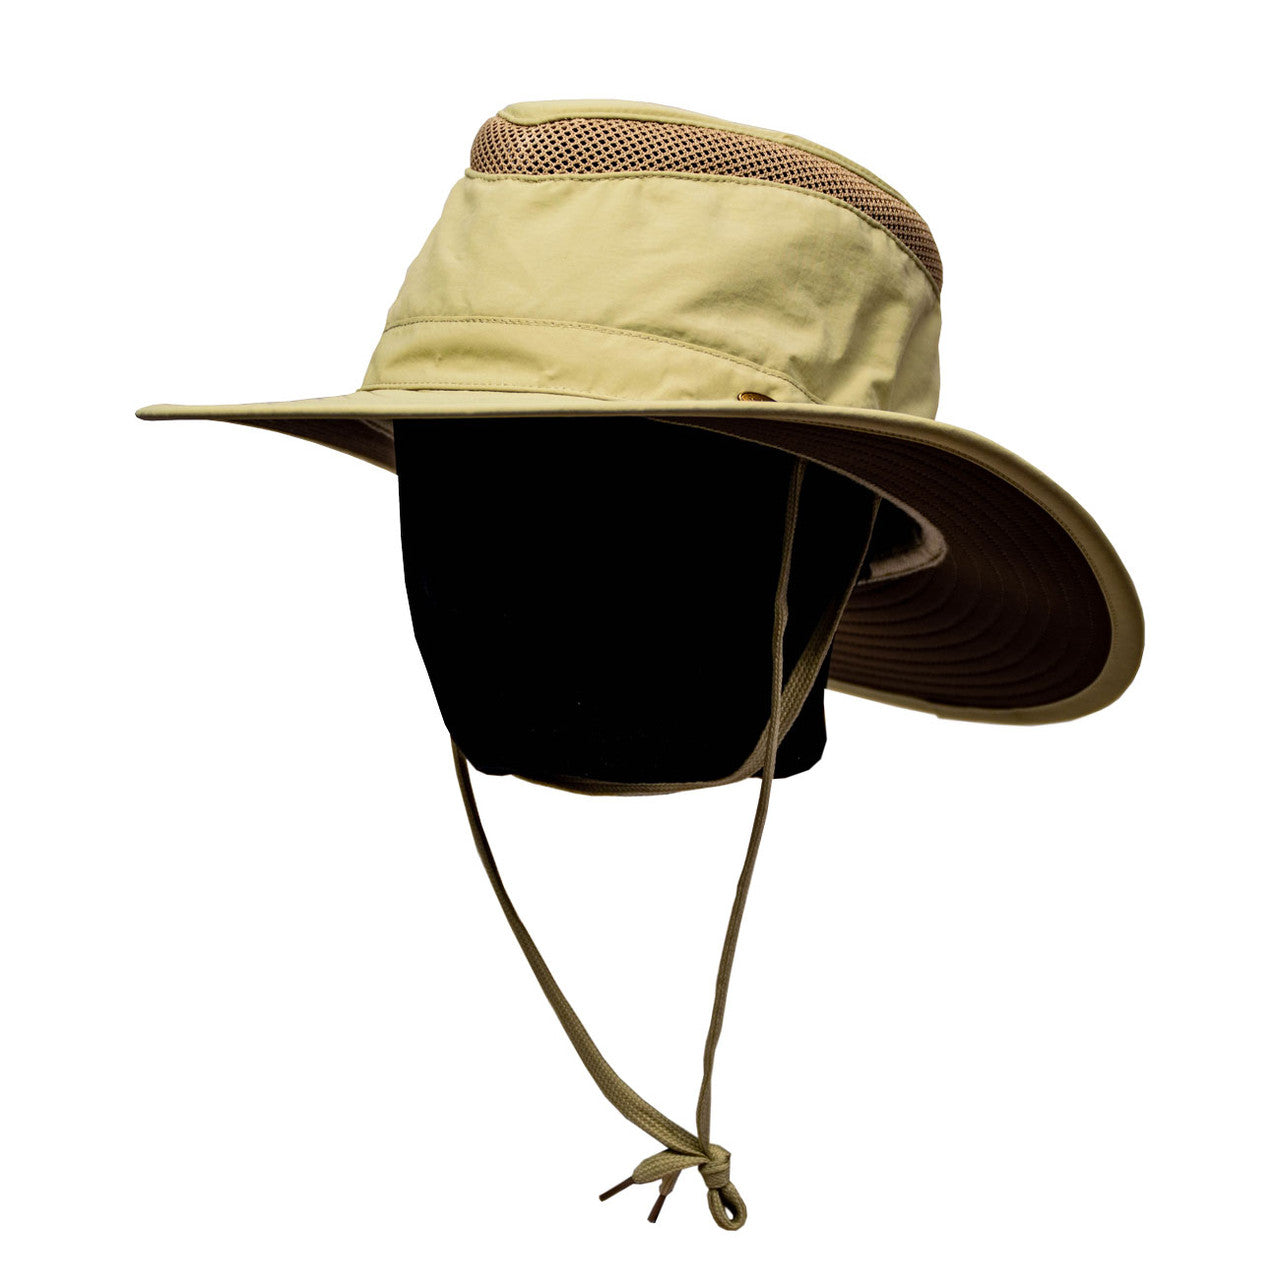 Breathable Hatfor Outdoor,Fishing Hat Polyester Nylon Adjustable Hat  Fishing Hat Class Leading Features